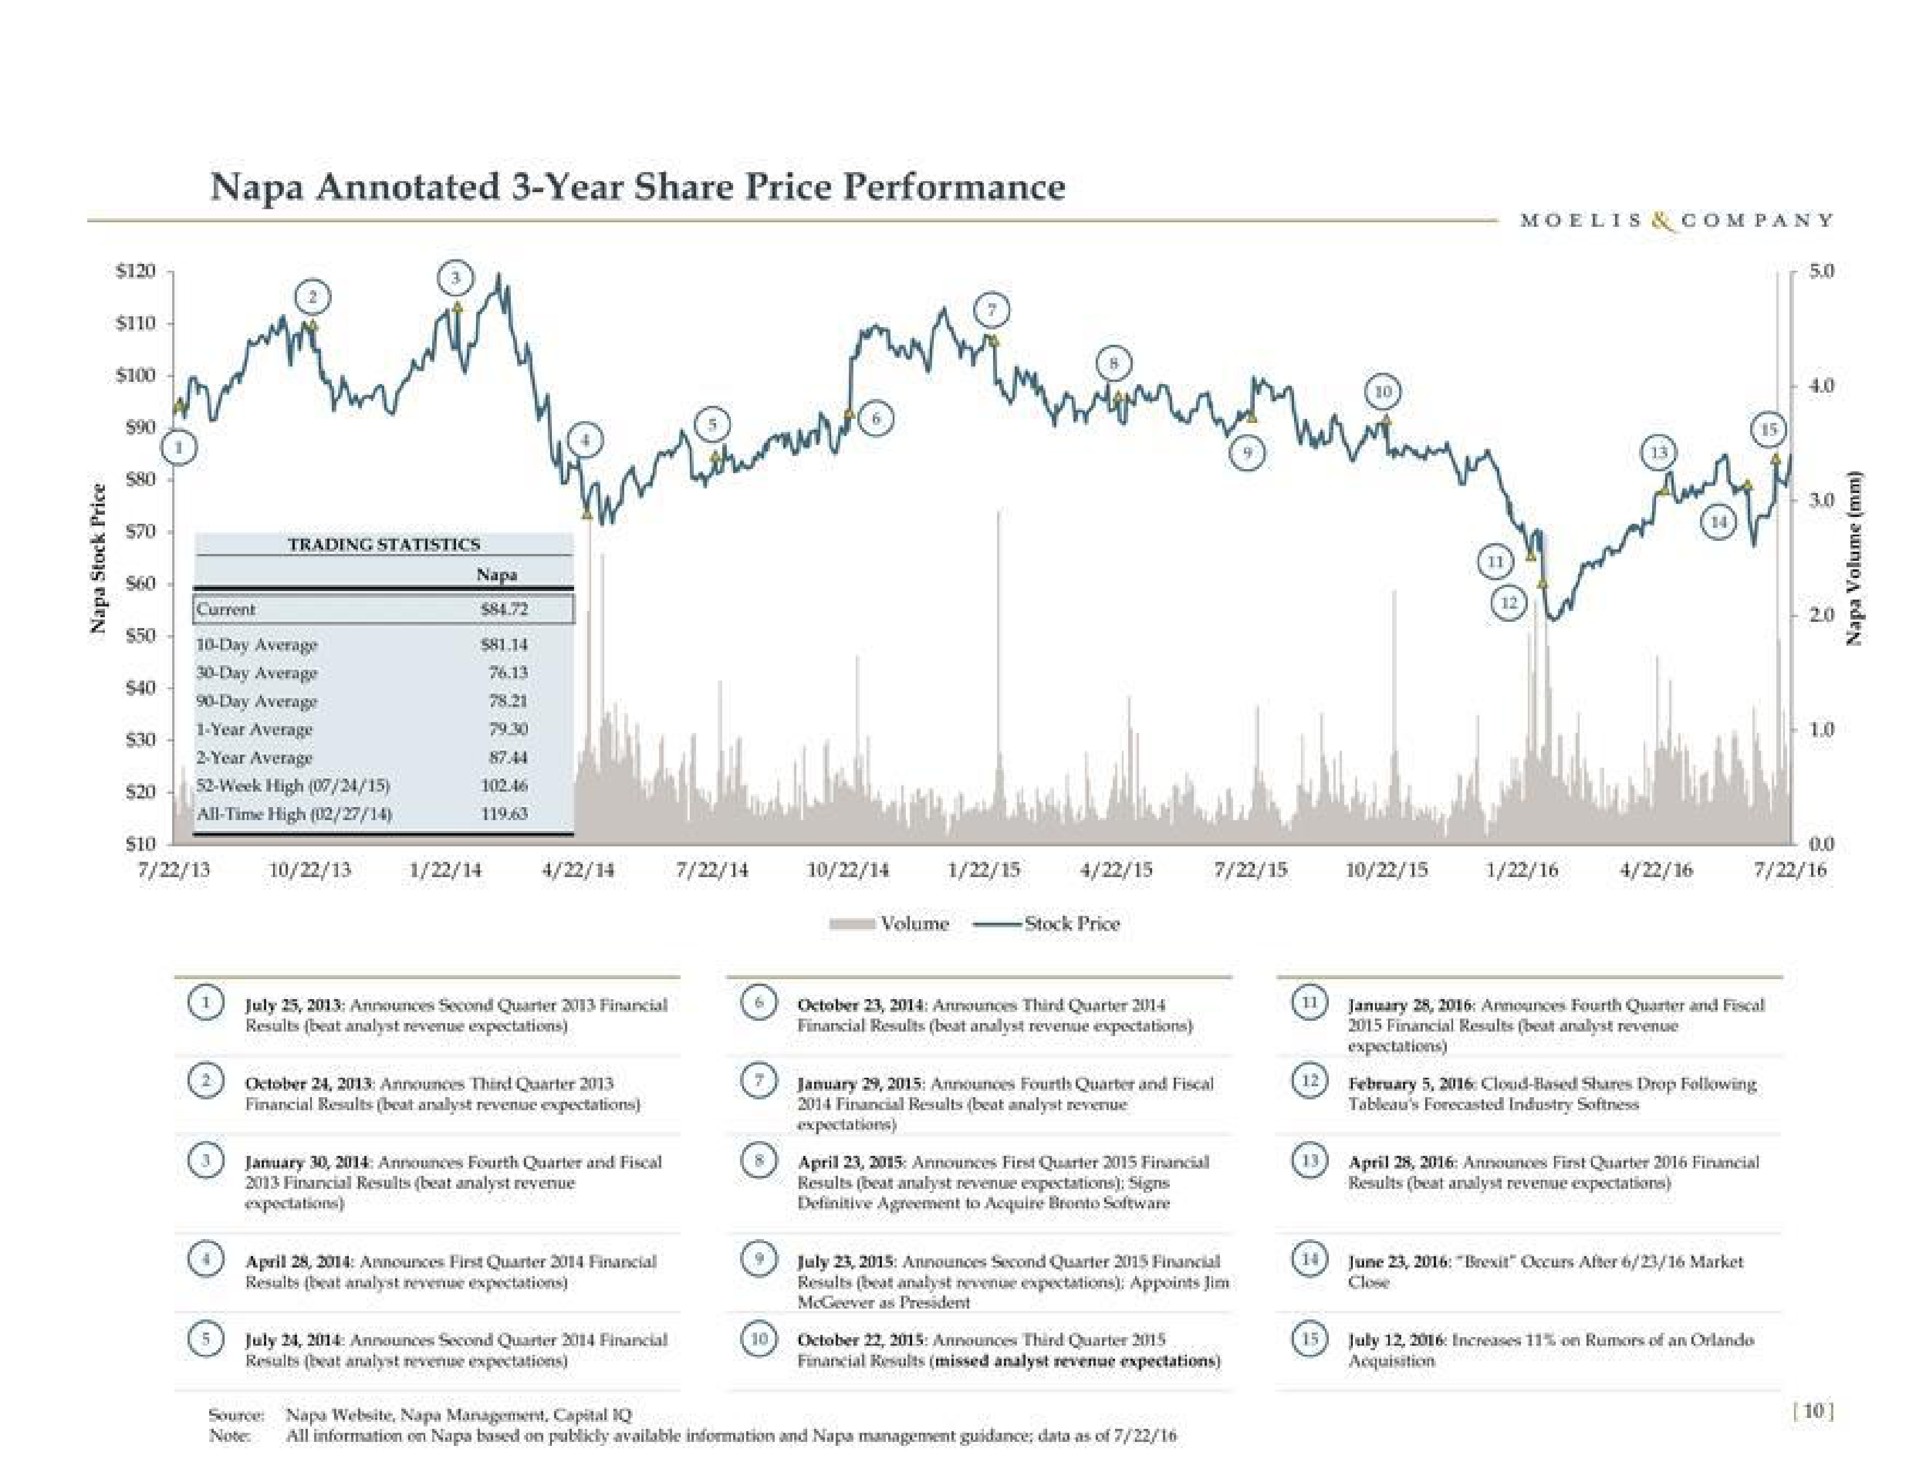 napa annotated year share price performance a trading statistics all time high pad hie | Moelis & Company